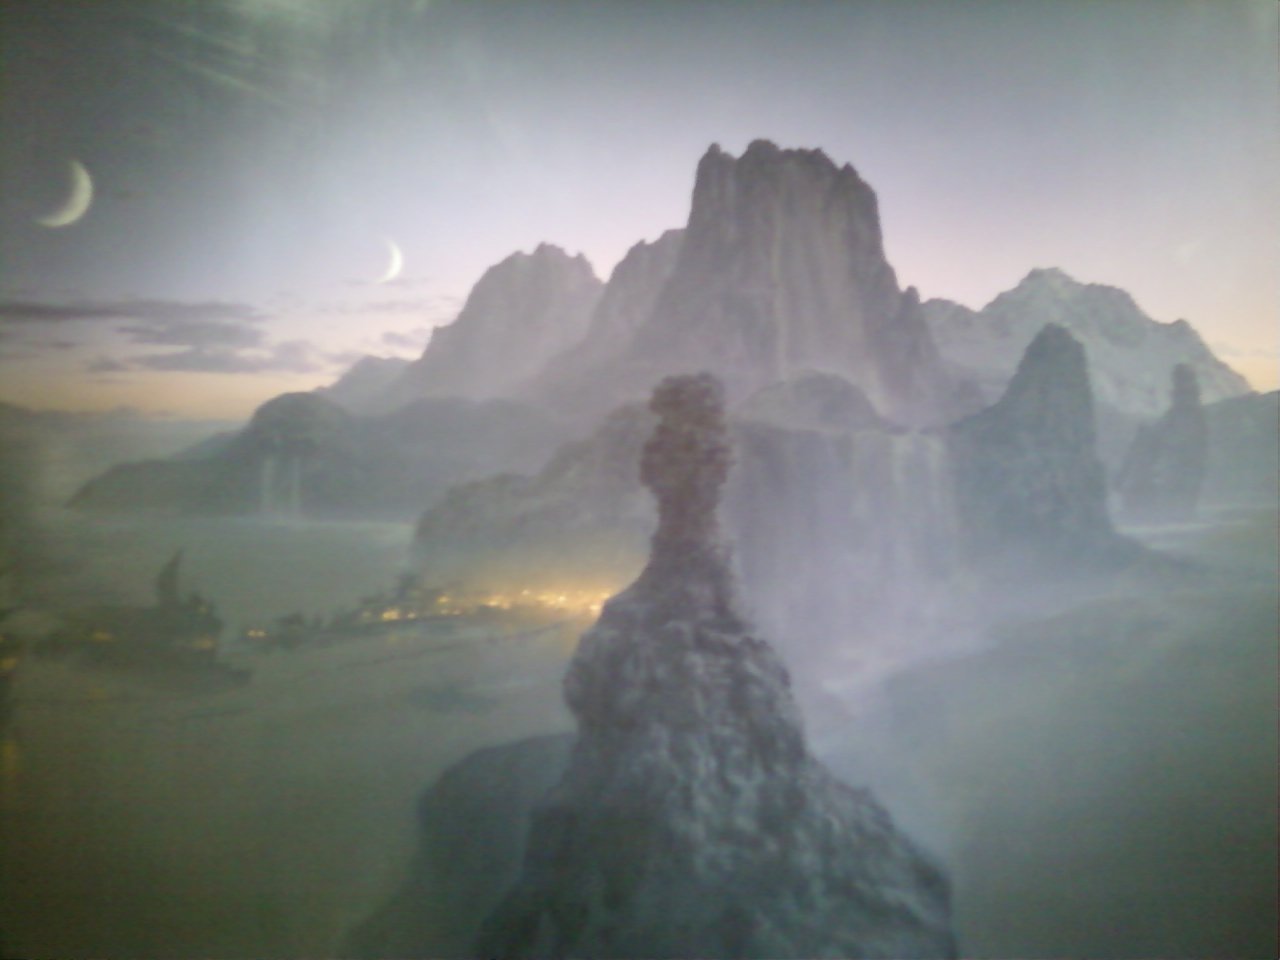 On of the last matte painting they used for backgrounds in film.